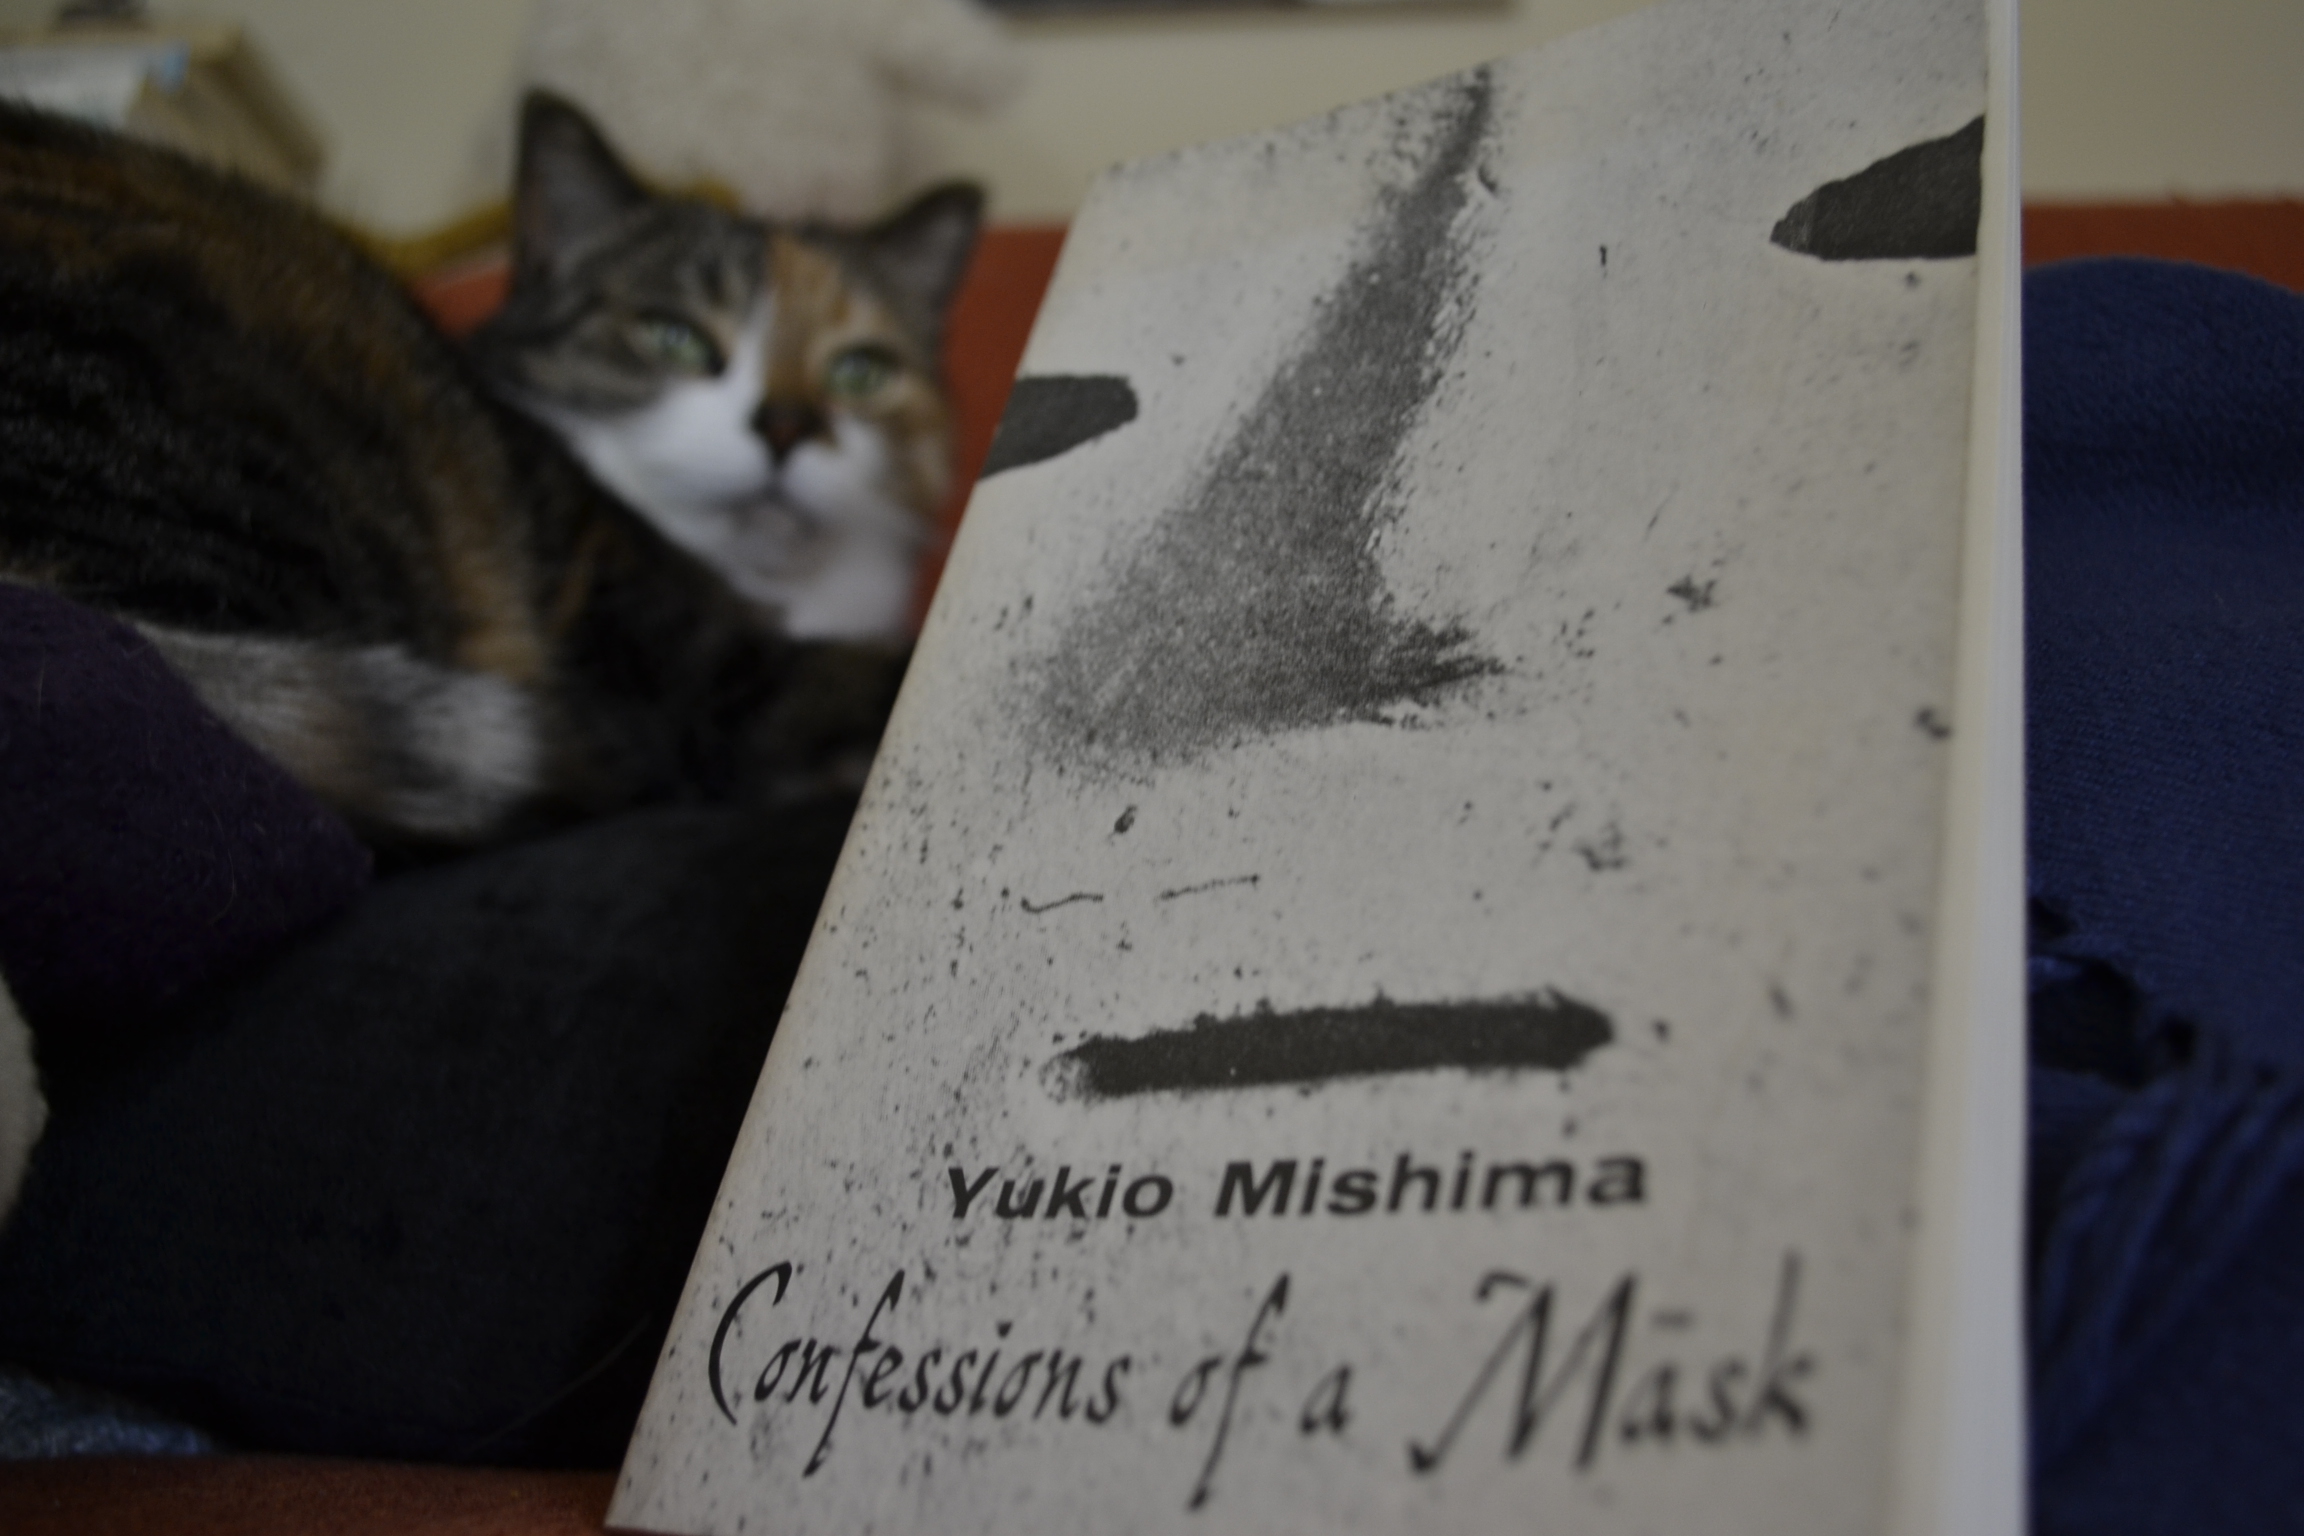 The black-and-white cover of Confessions of a Mask by Yukio MIshima.